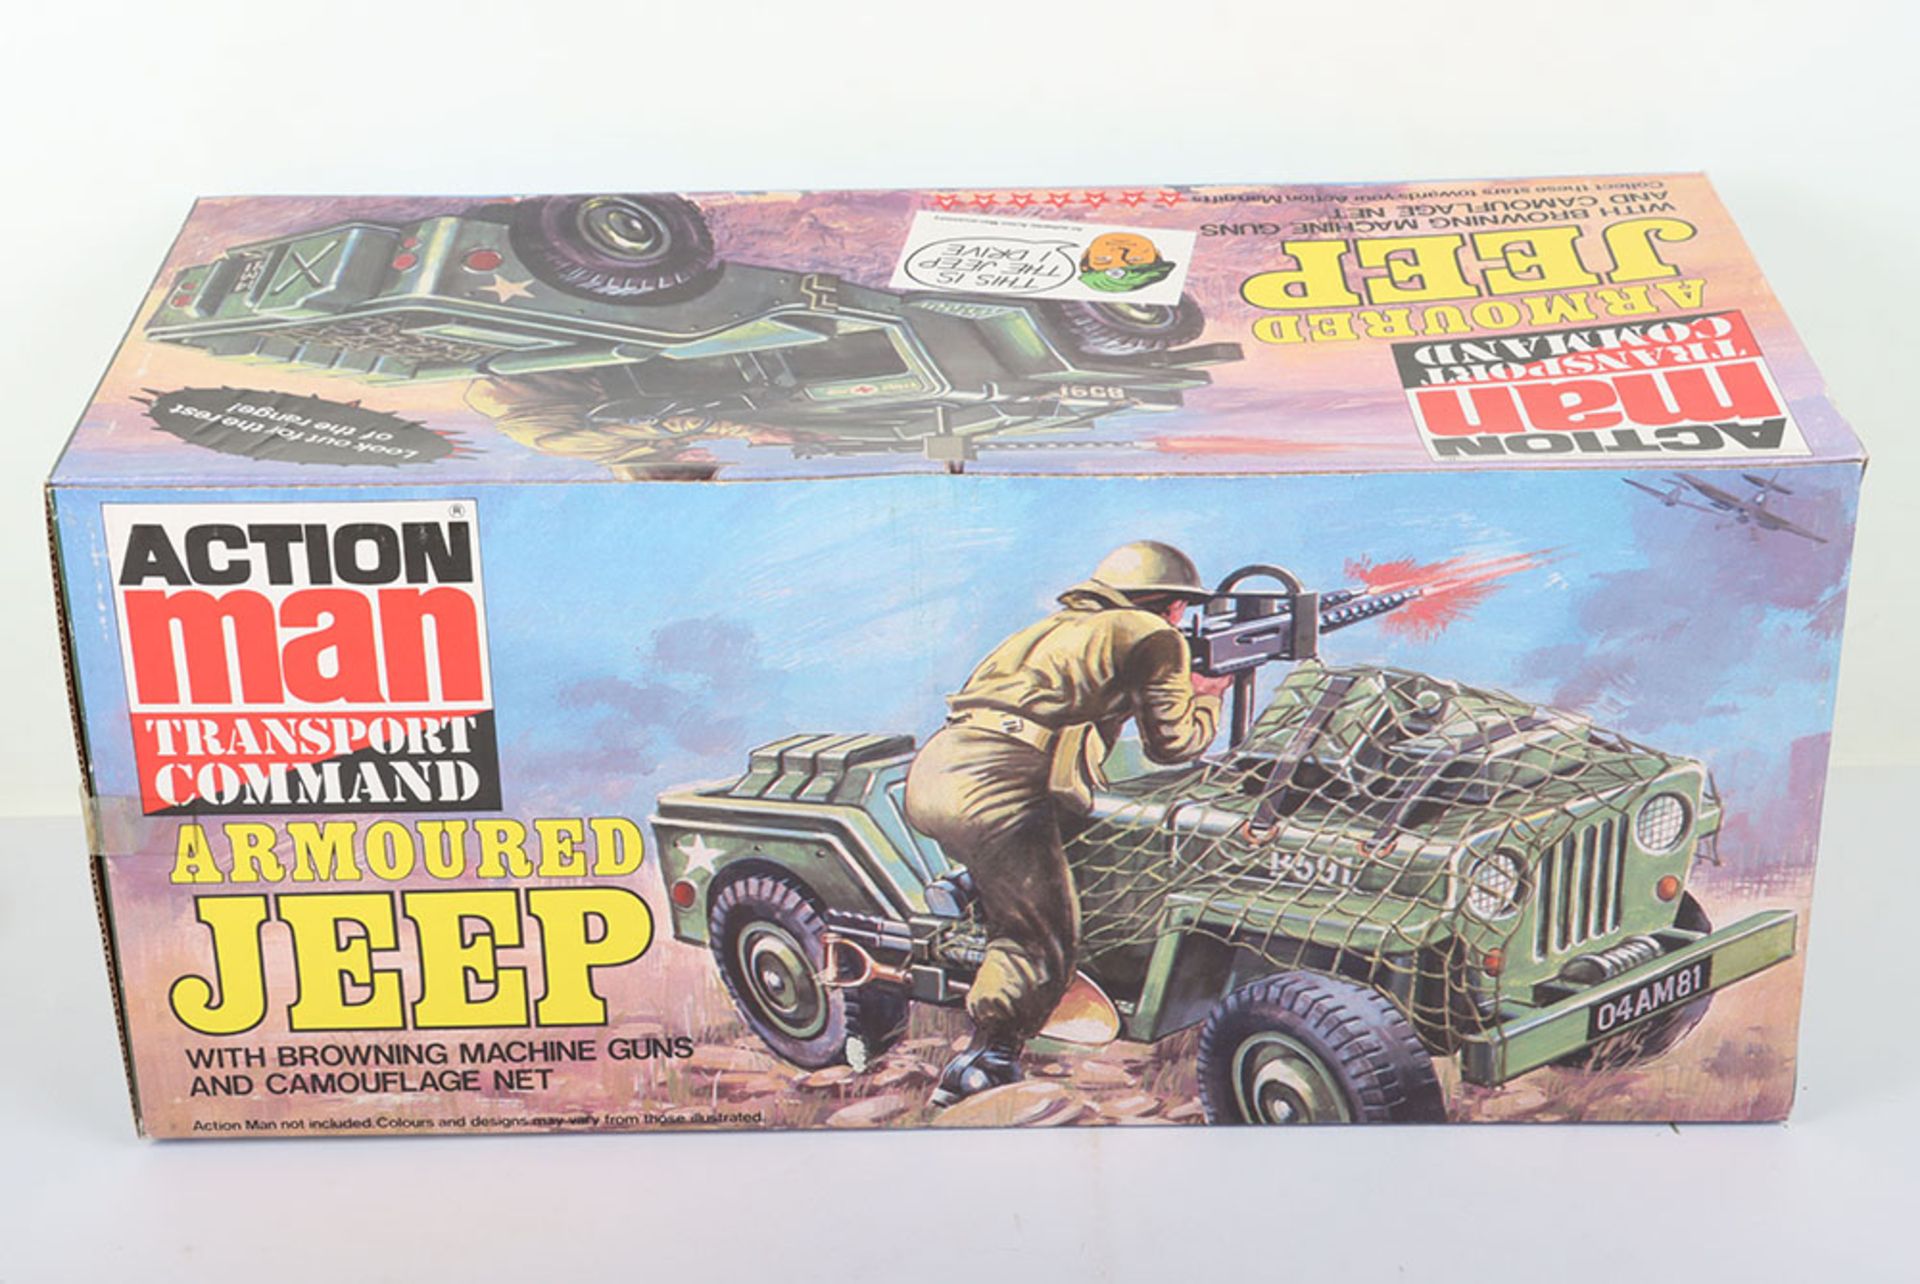 Palitoy Action Man Transport Command Armoured Jeep - Image 2 of 5